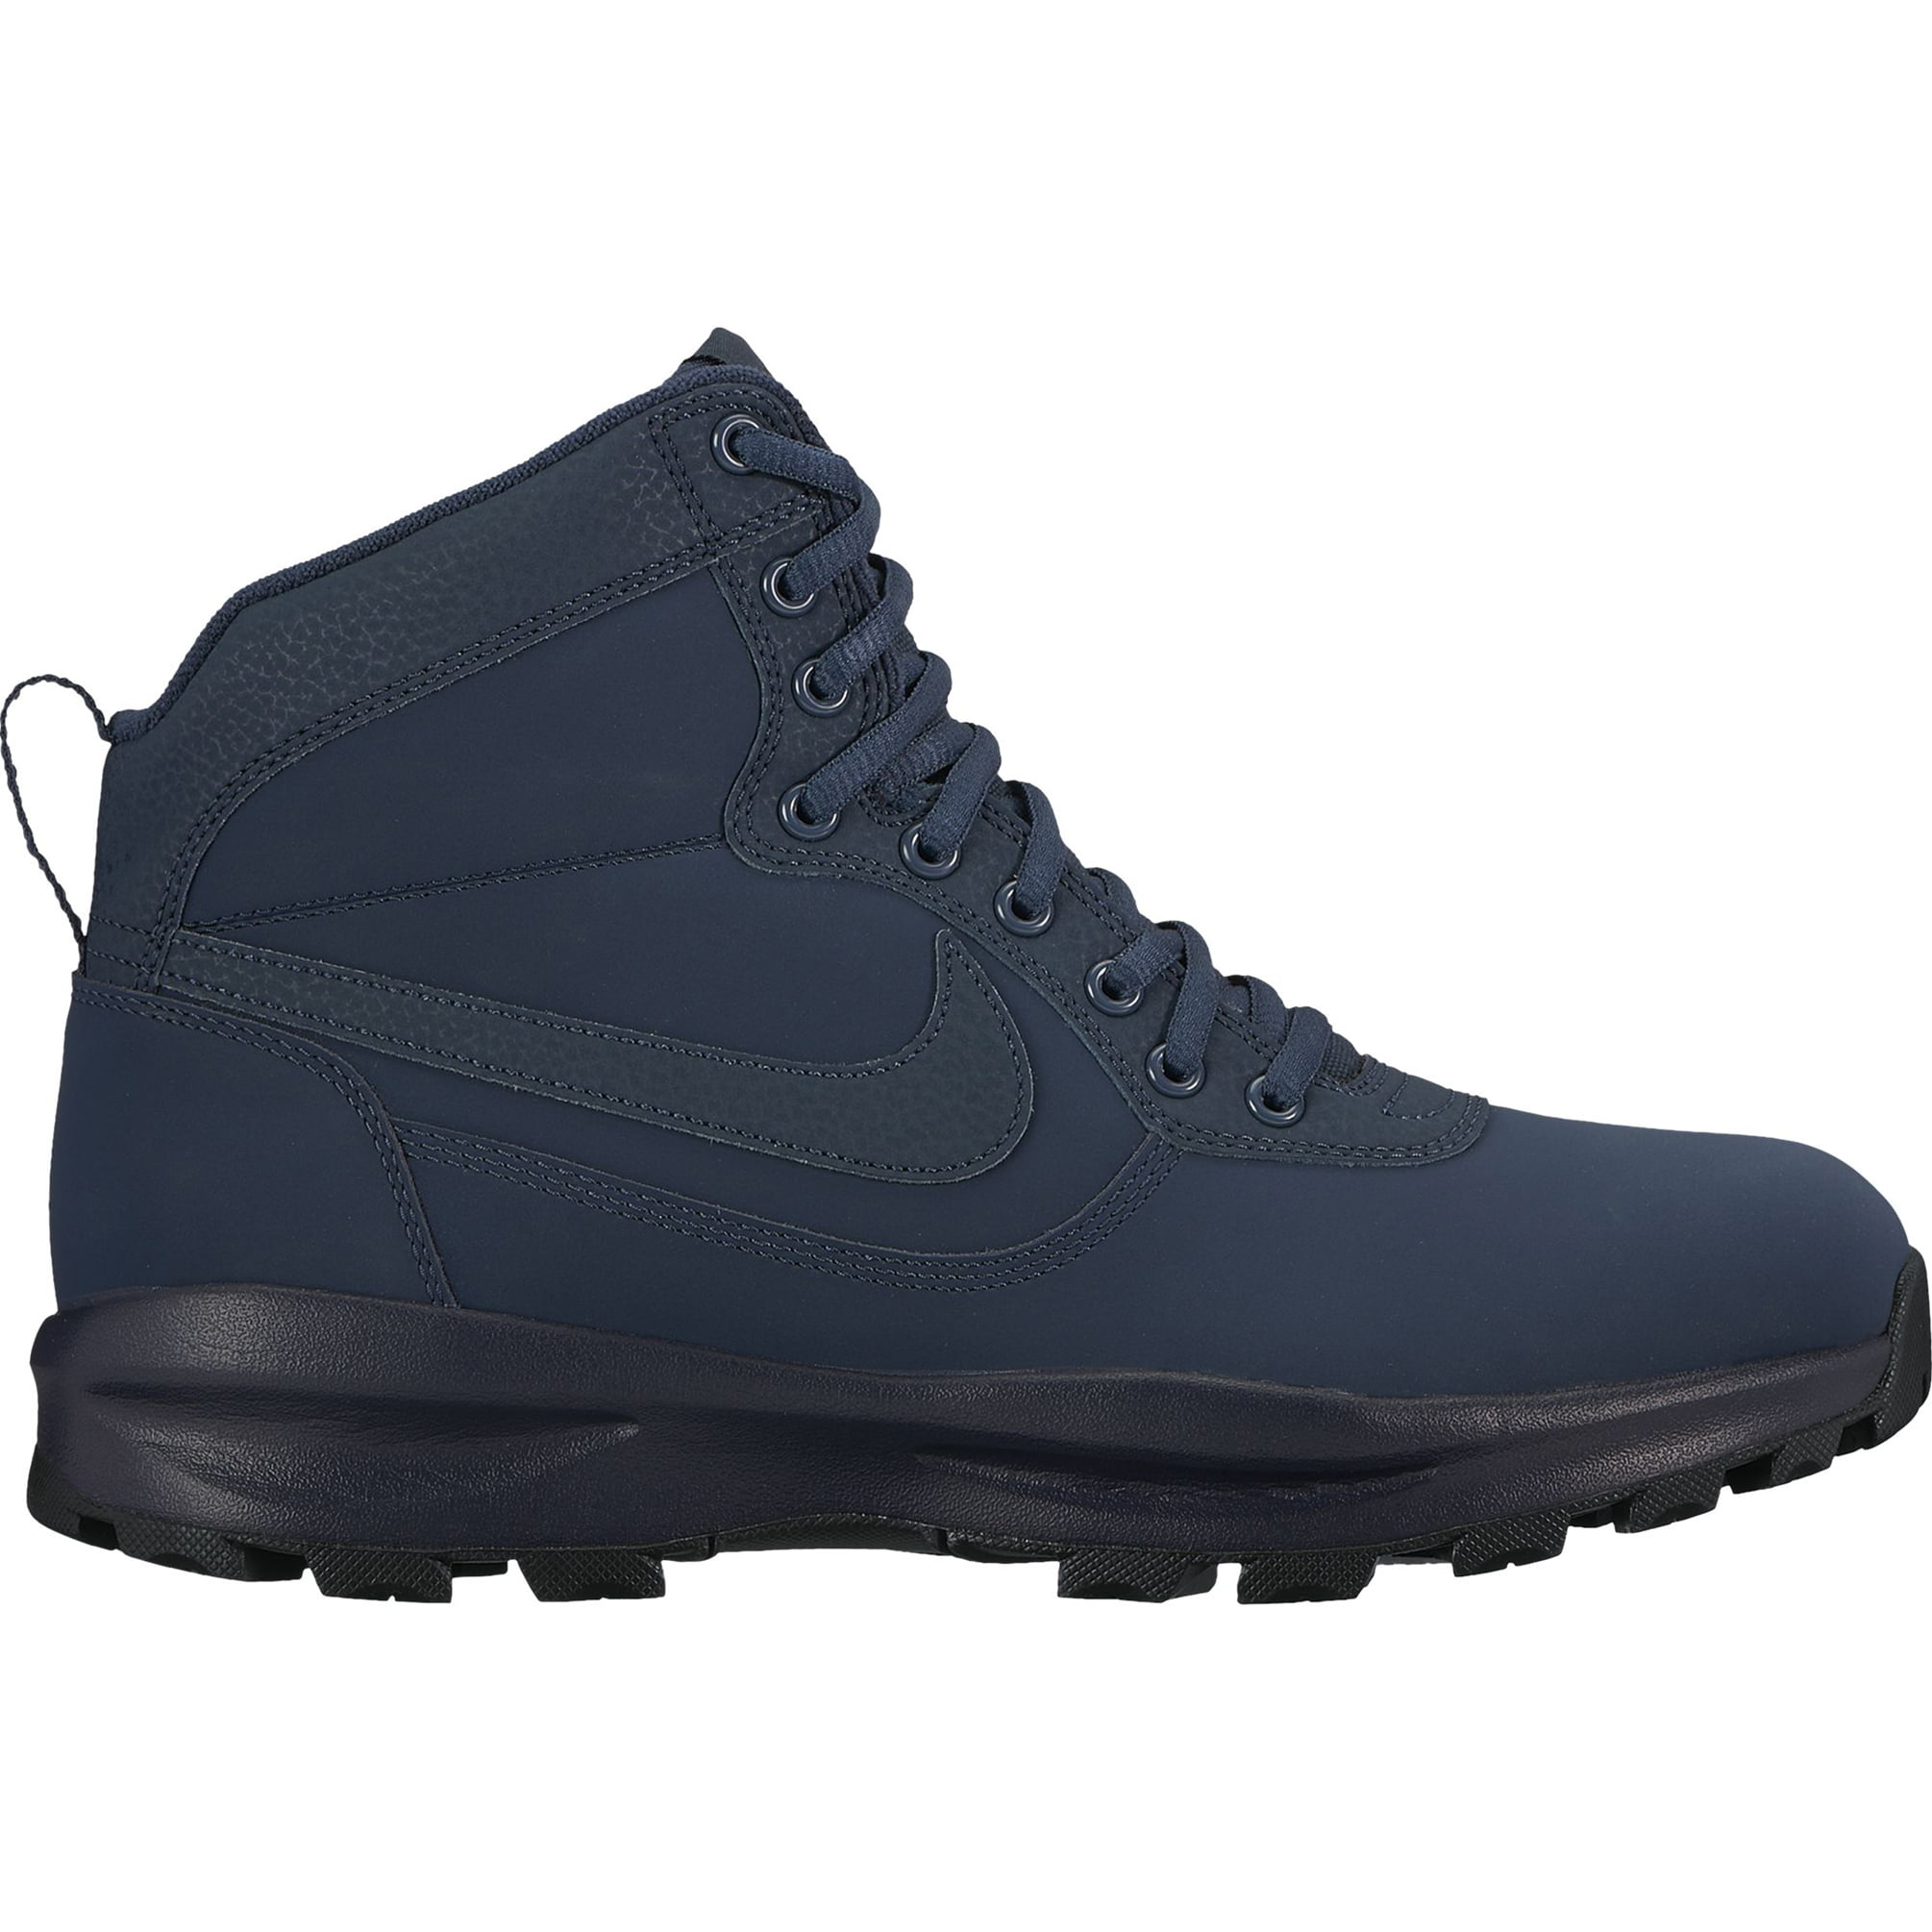 navy nike boots